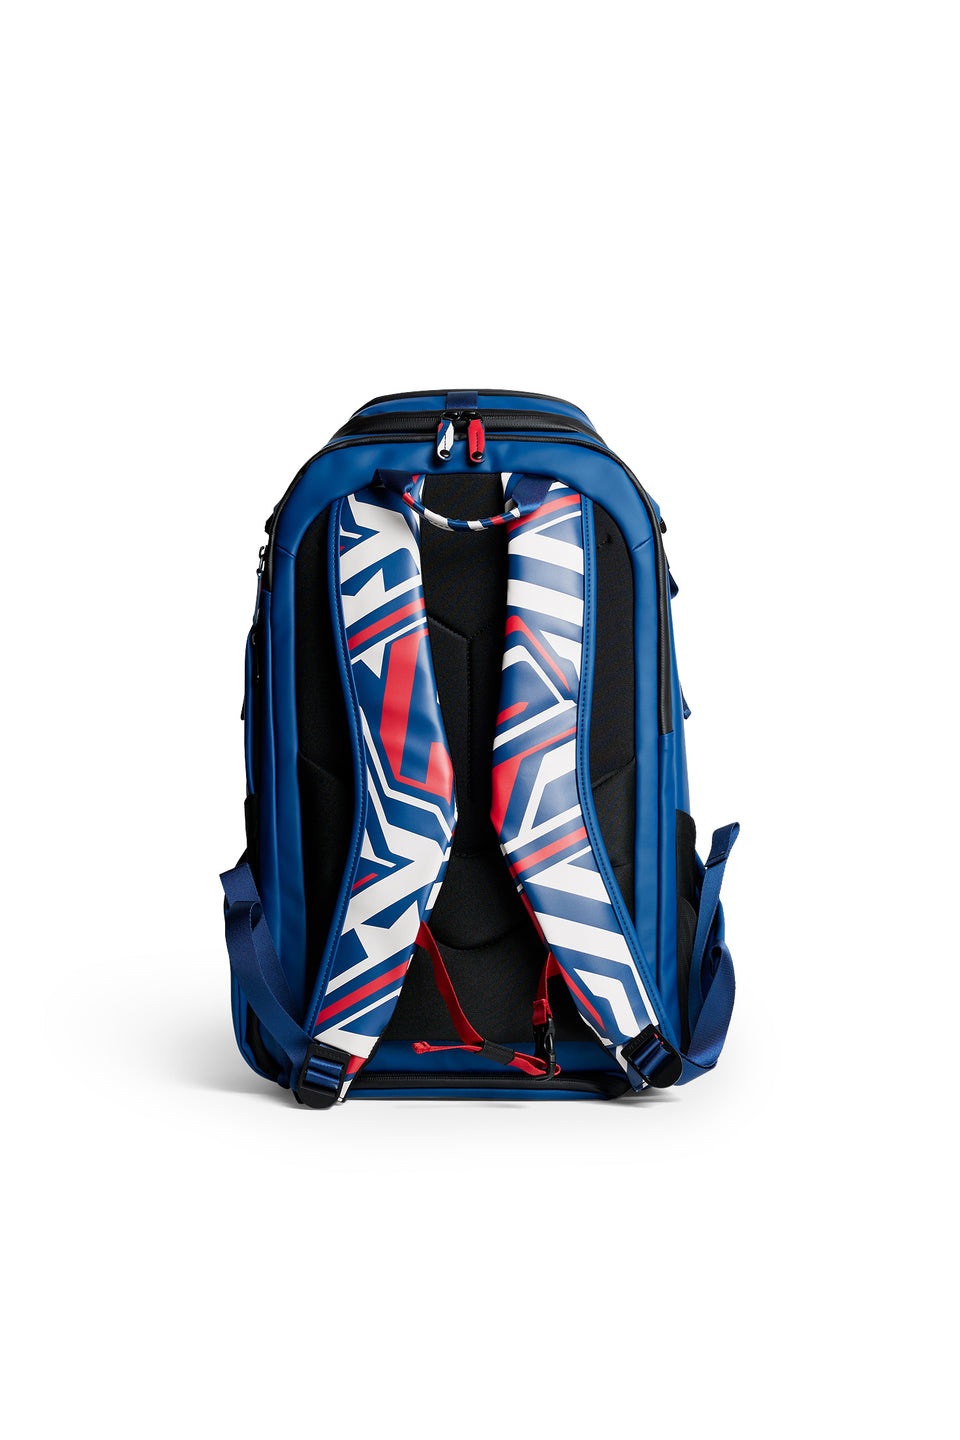 The Primex Back Pack / US Golf Red